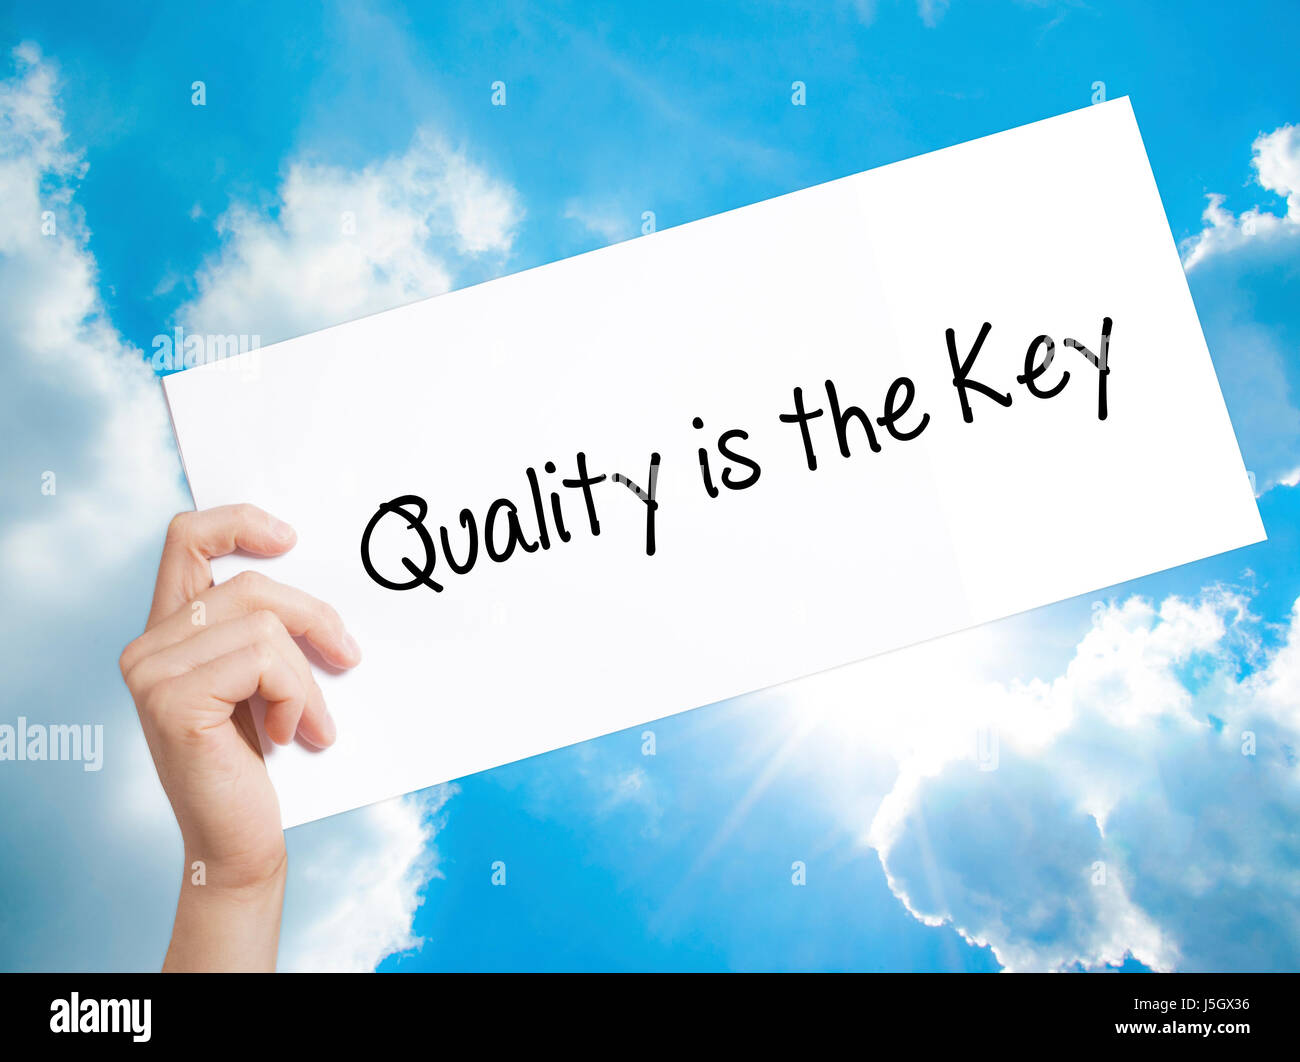 Quality is the Key Sign on white paper. Man Hand Holding Paper with text. Isolated on sky background.  technology, internet concept. Stock Photo